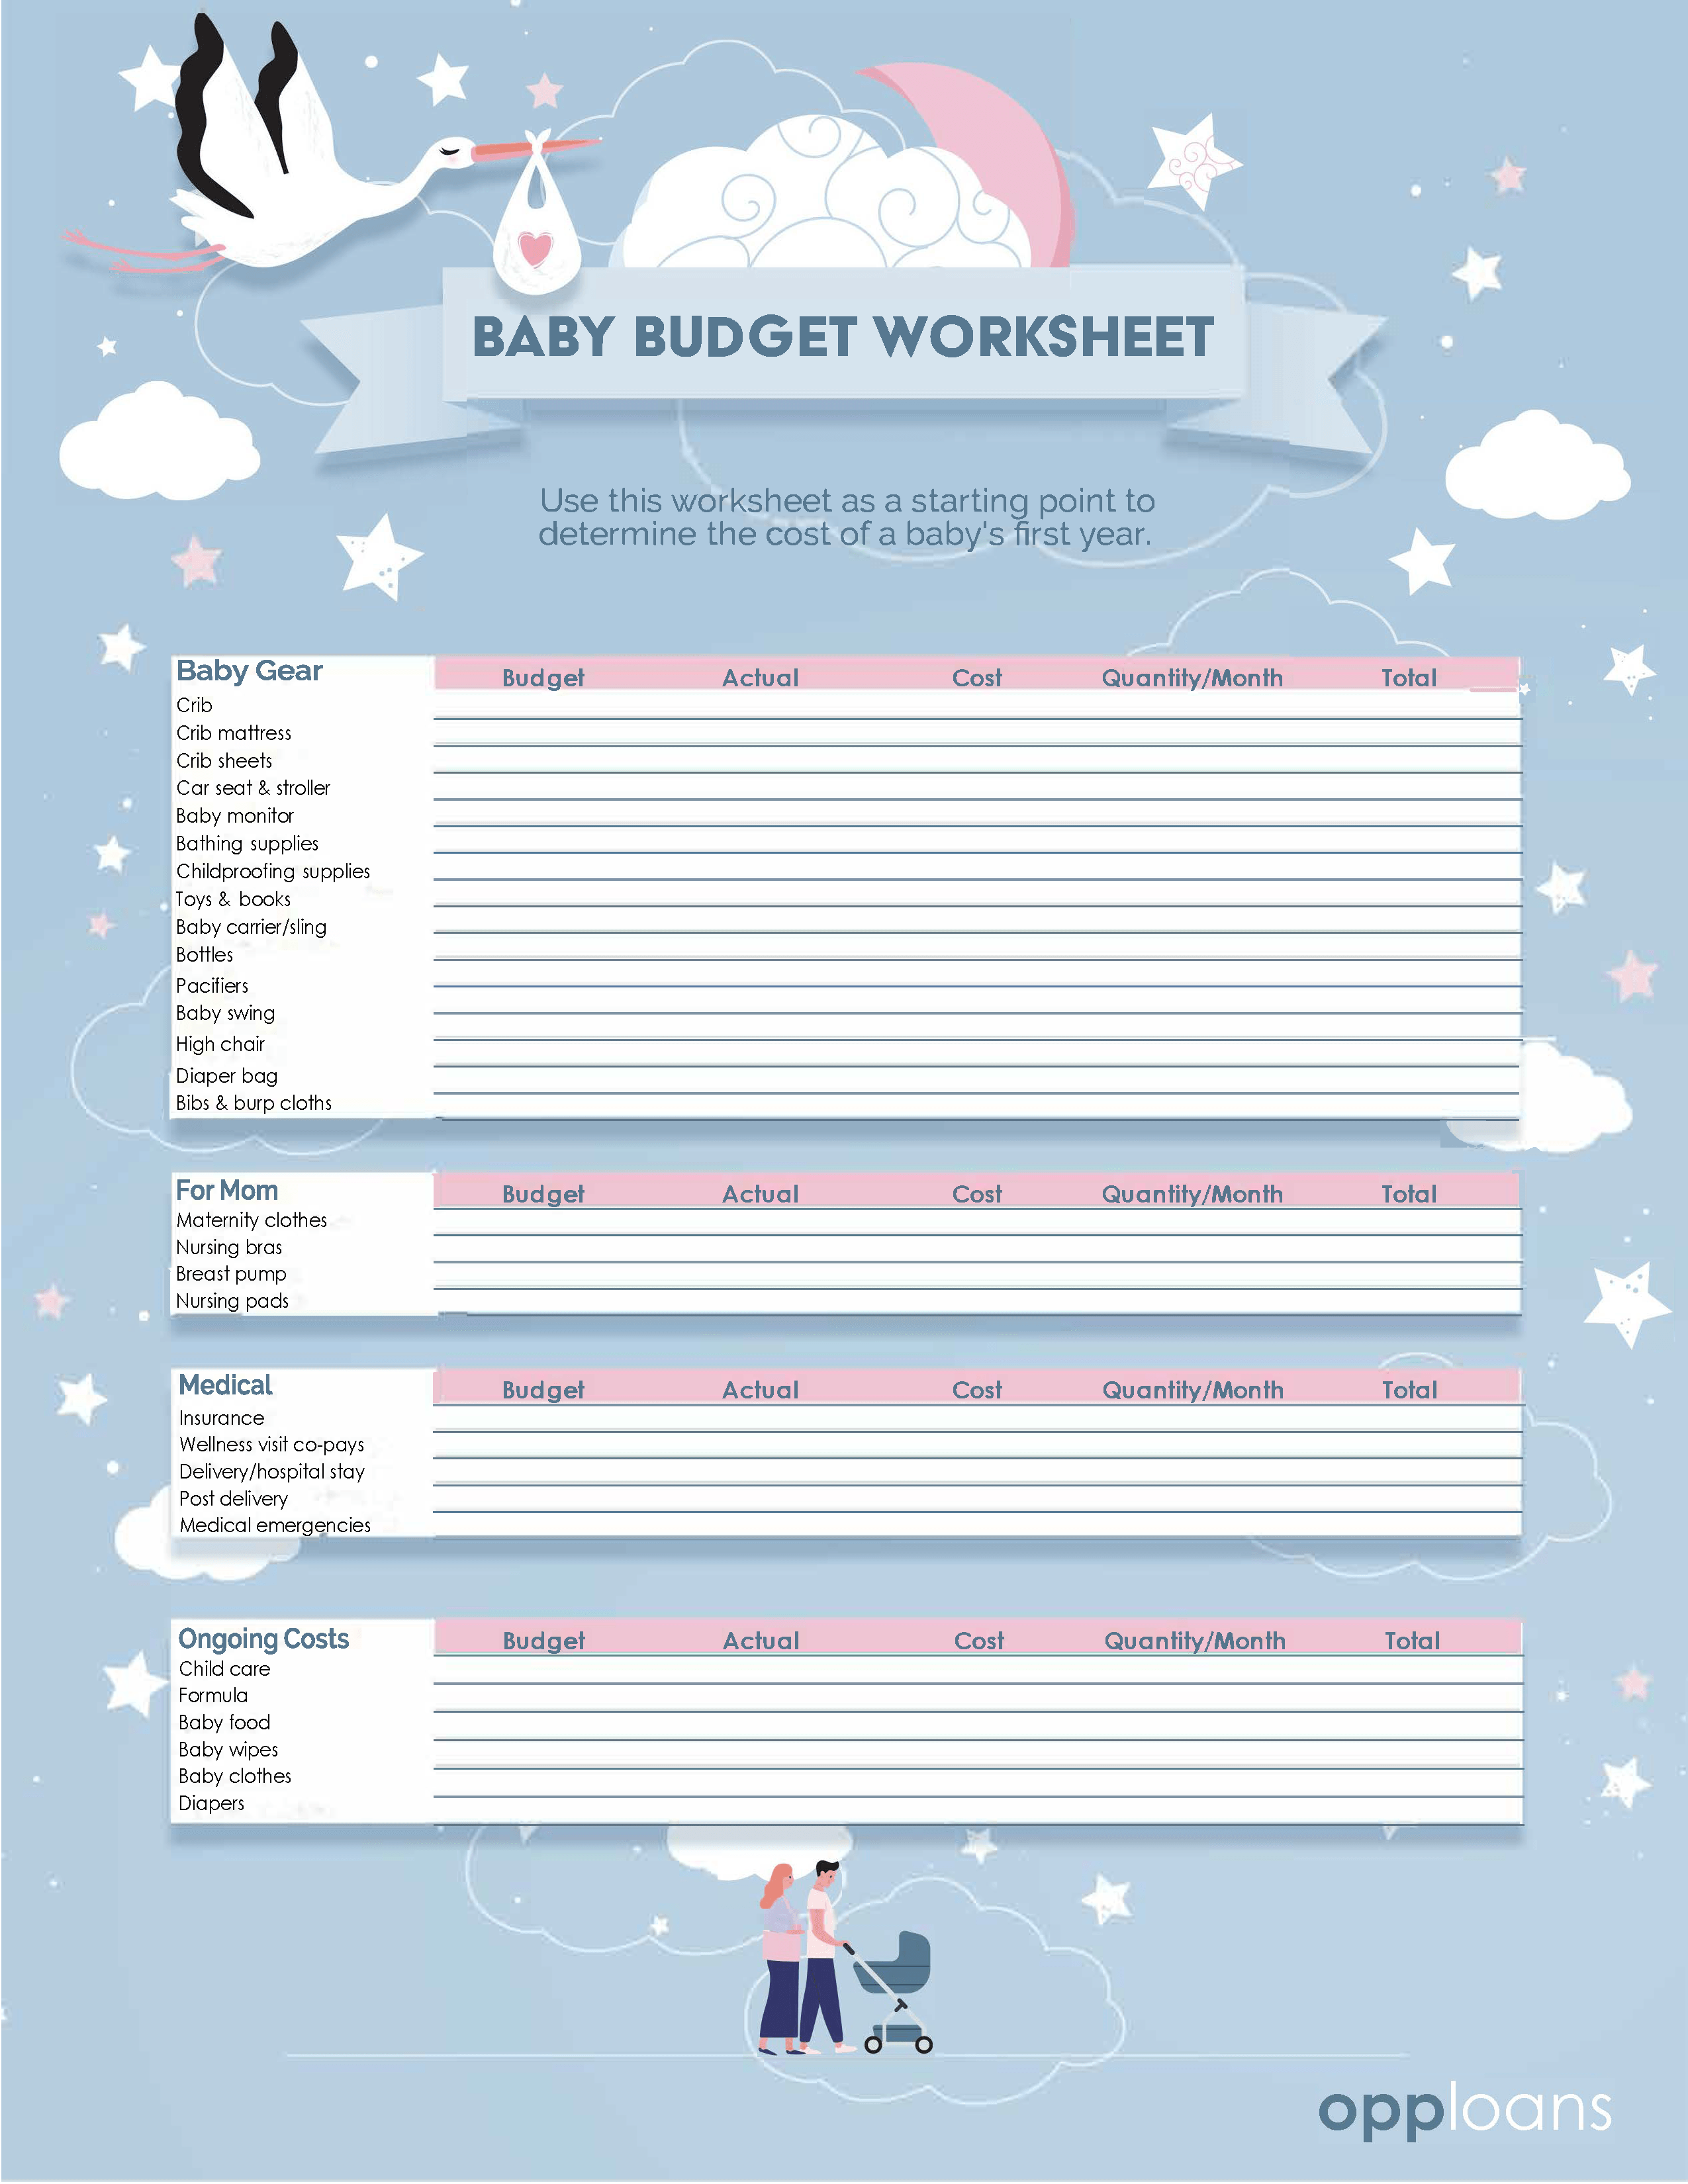 budgeting-for-a-baby-worksheet-budgeting-worksheets